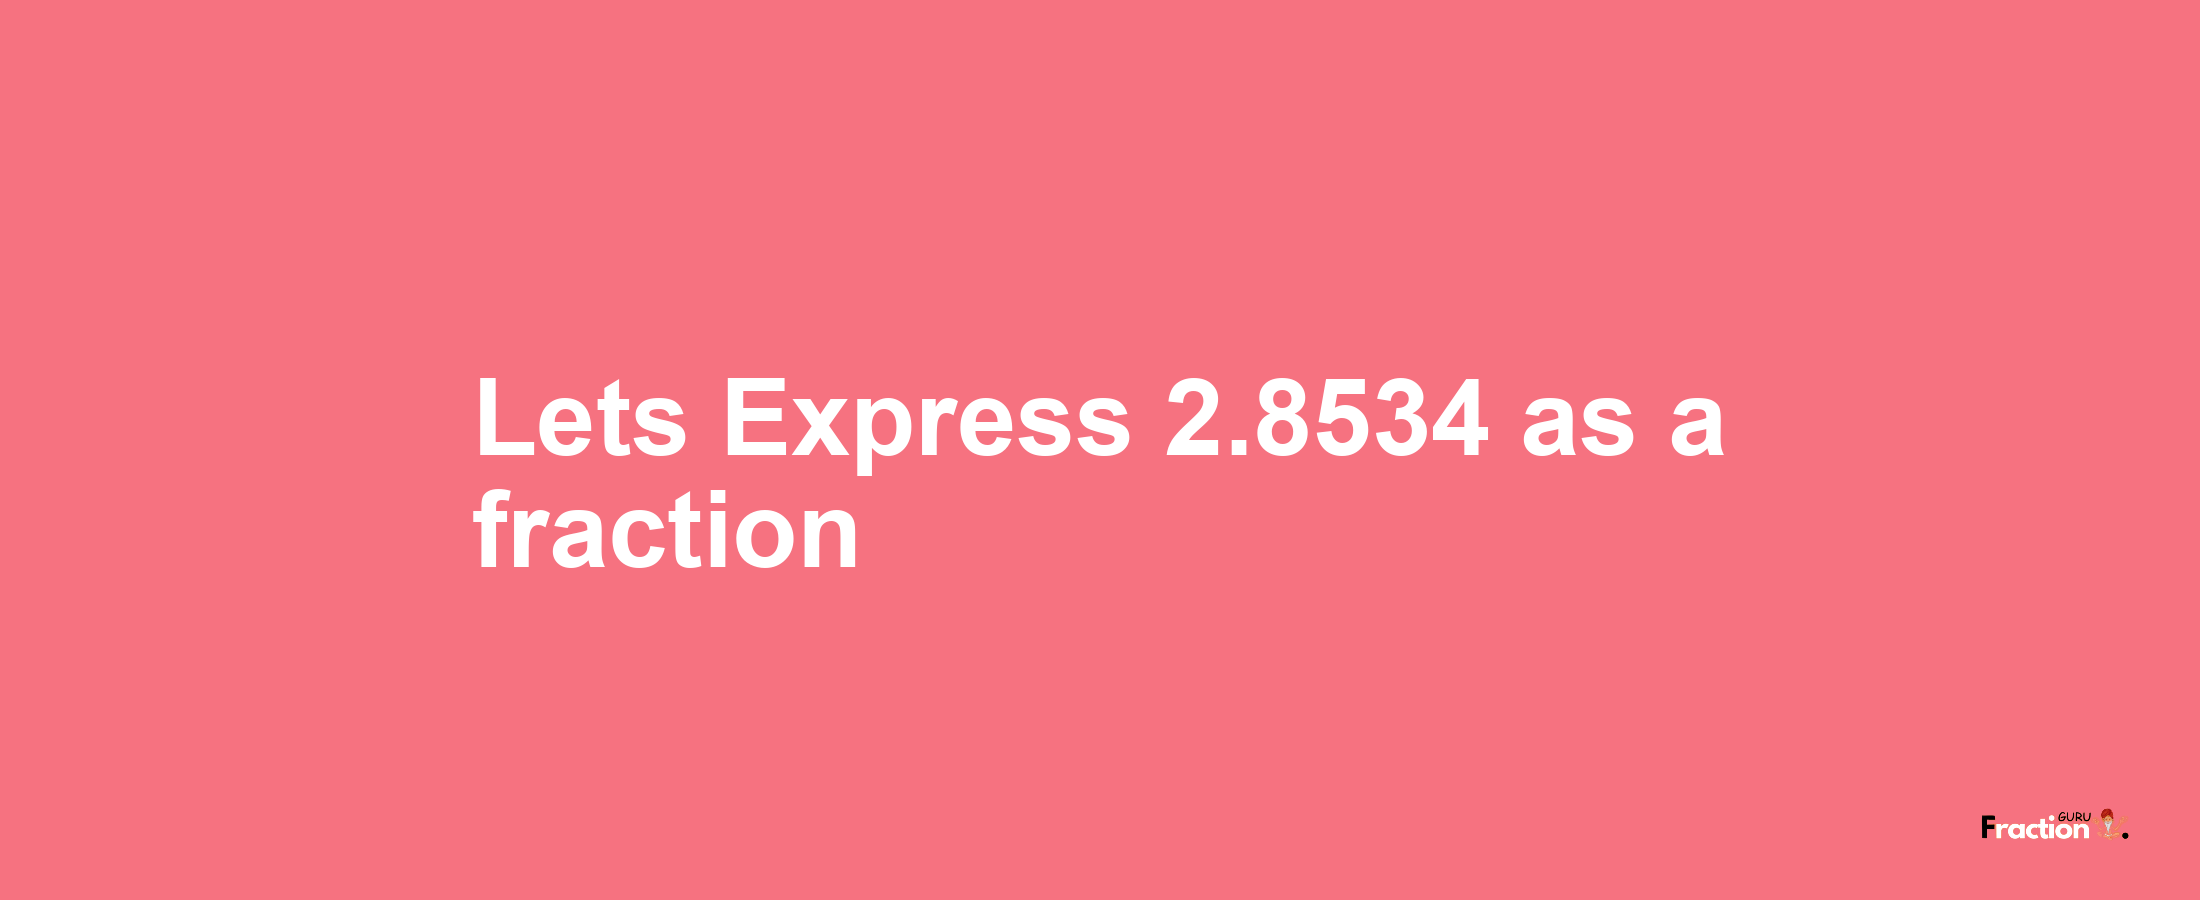 Lets Express 2.8534 as afraction